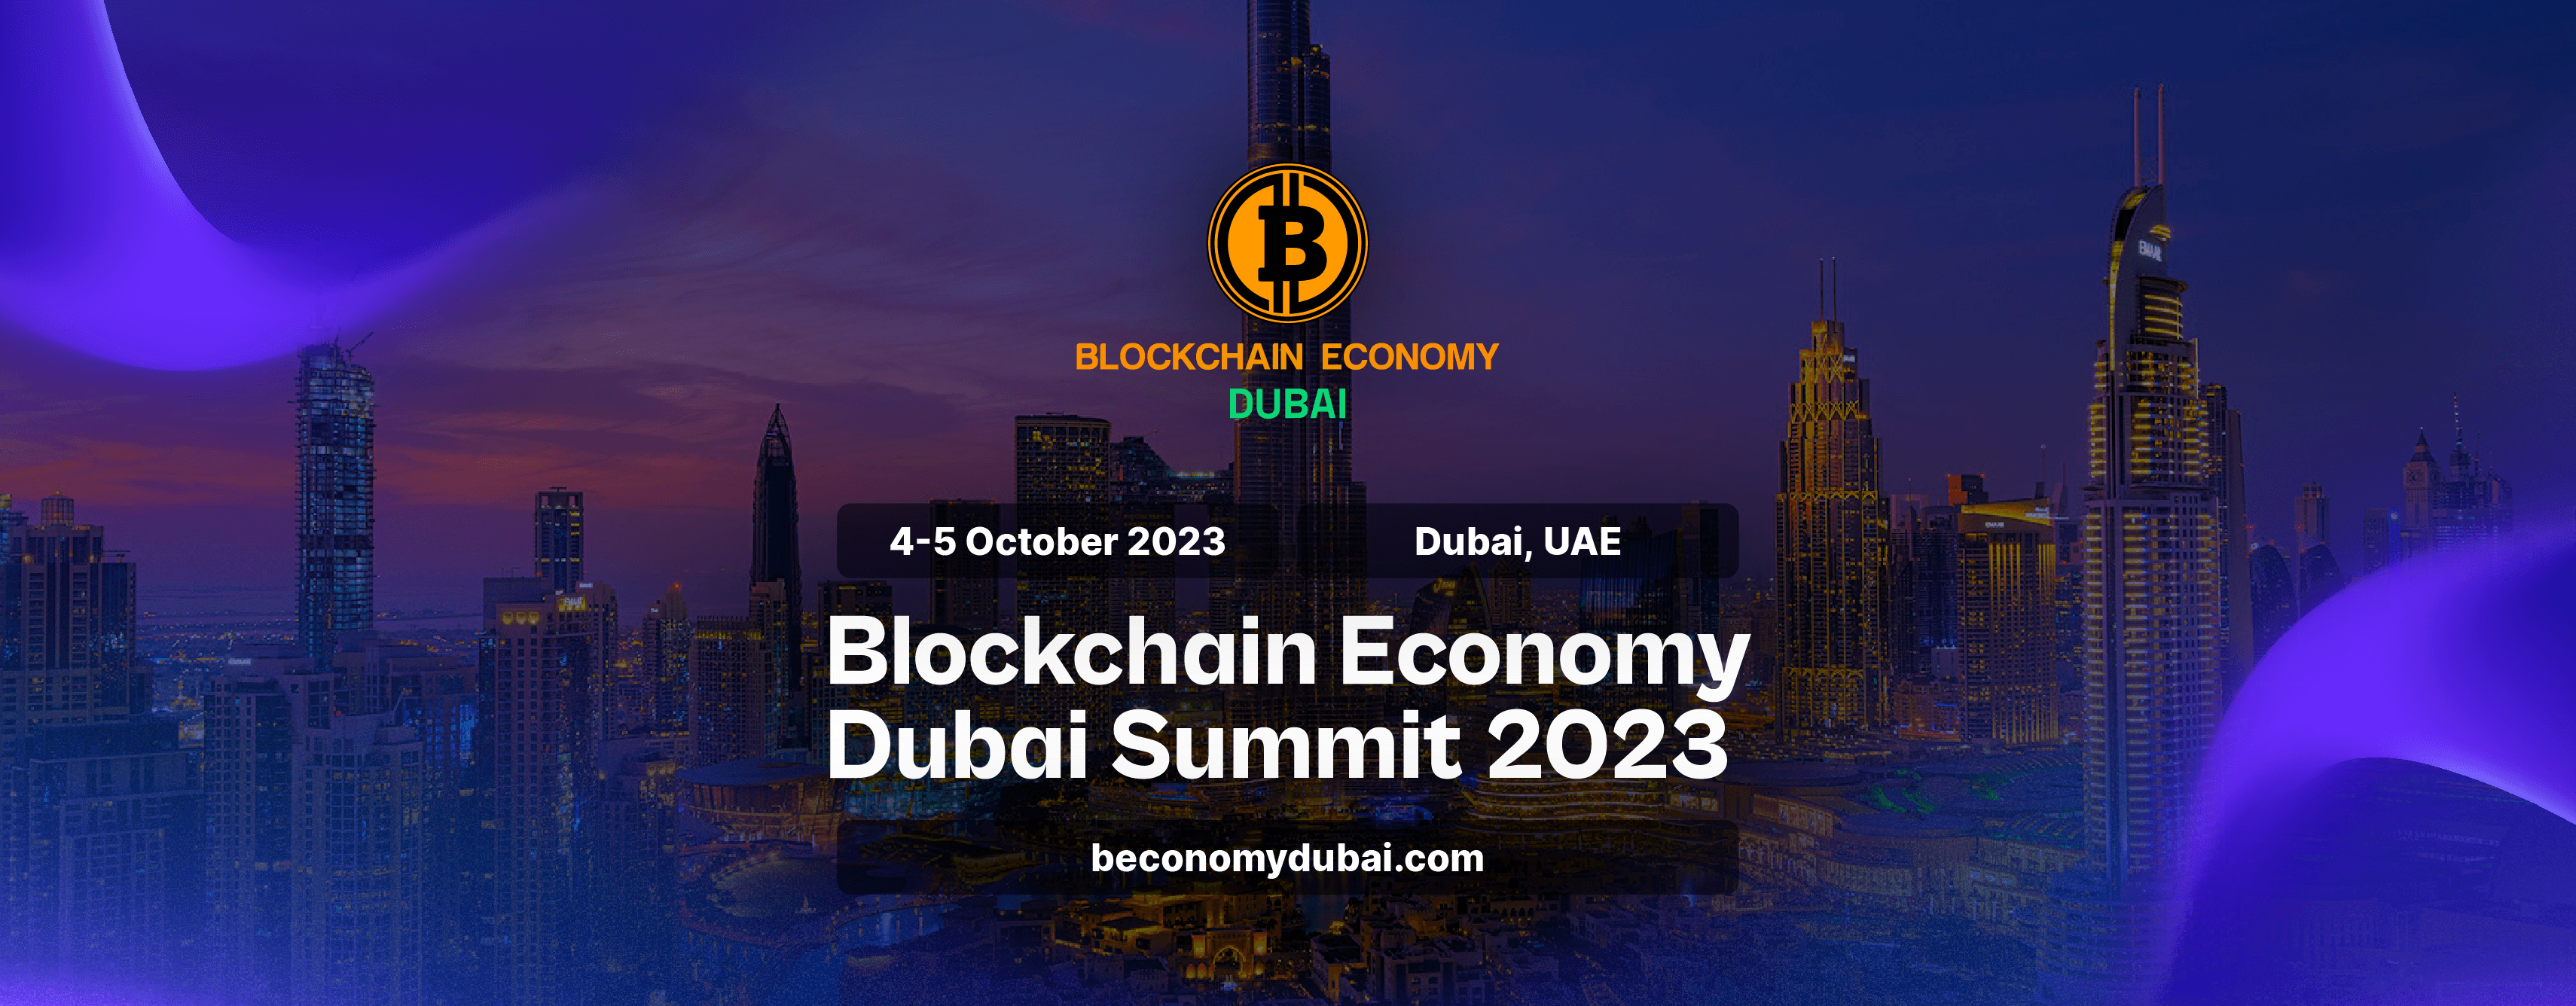 The Global Crypto Community Gathers for Dubai’s Blockchain Economy Summit, Uniting Industry Leaders for a Groundbreaking Event 4-5  October 2023